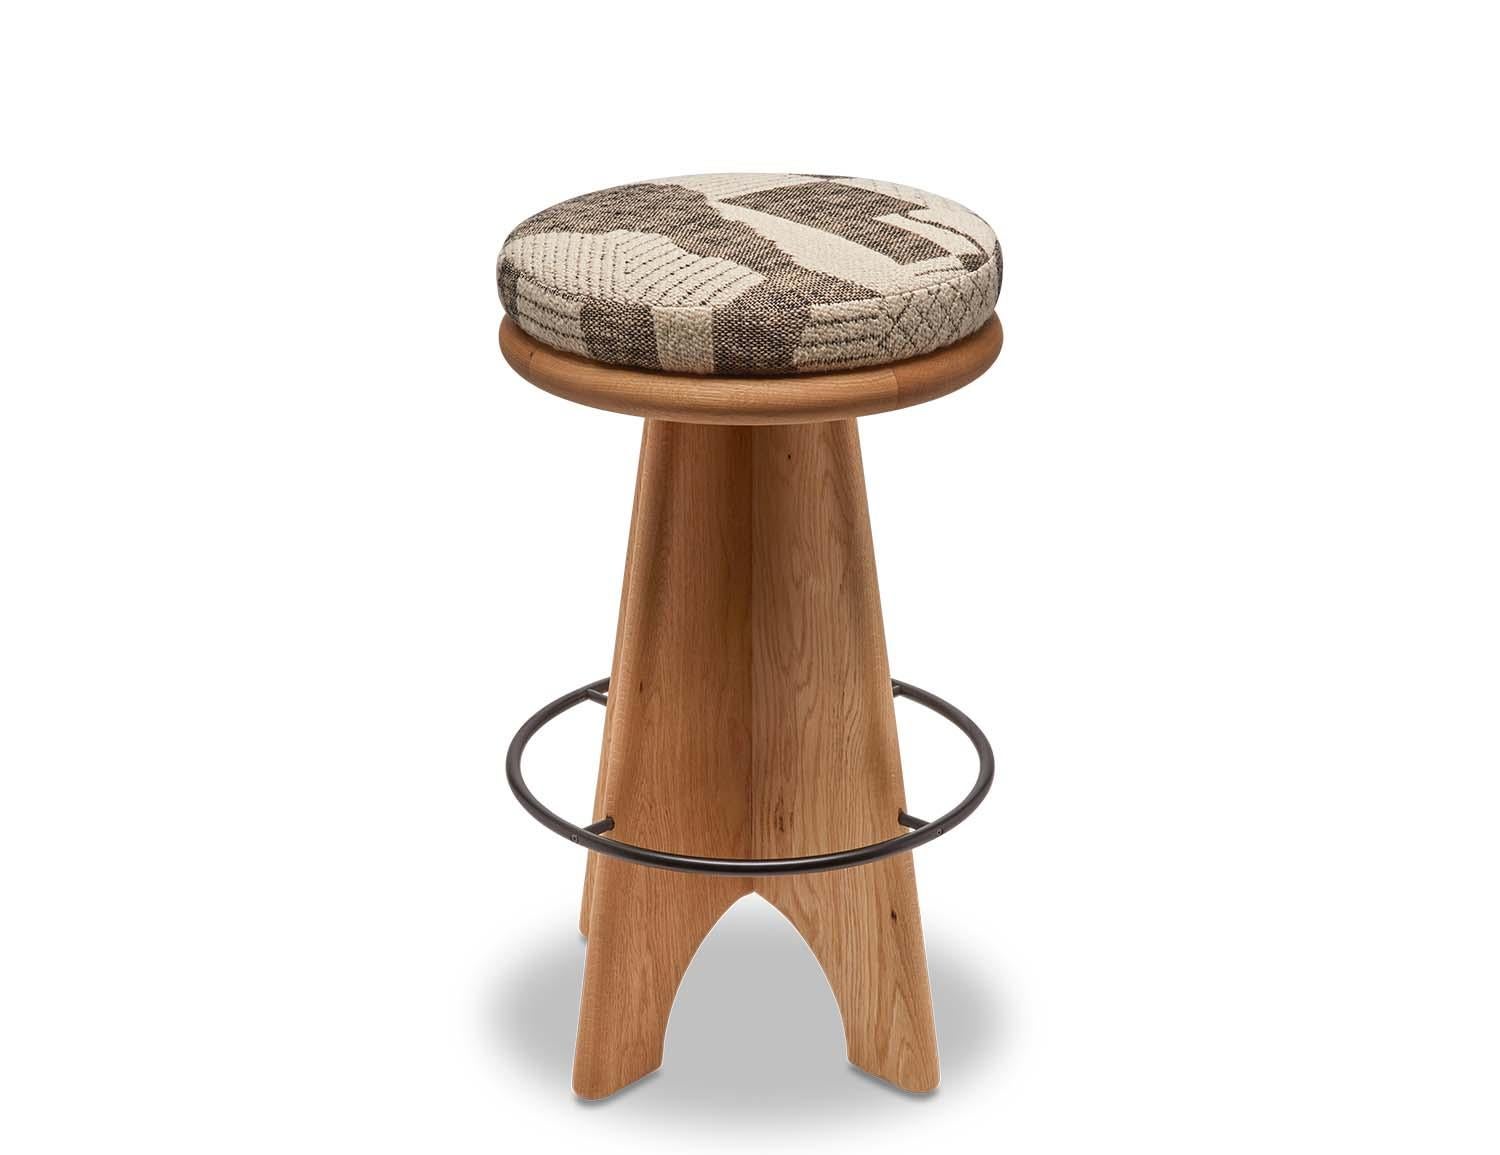 Oak Ojai Swivel Barstool by Lawson-Fenning. The Ojai Barstool features a sculptural wood base, powdercoated metal footrest and an upholstered swivel seat.

The Lawson-Fenning Collection is designed and handmade in Los Angeles, California. Reach out